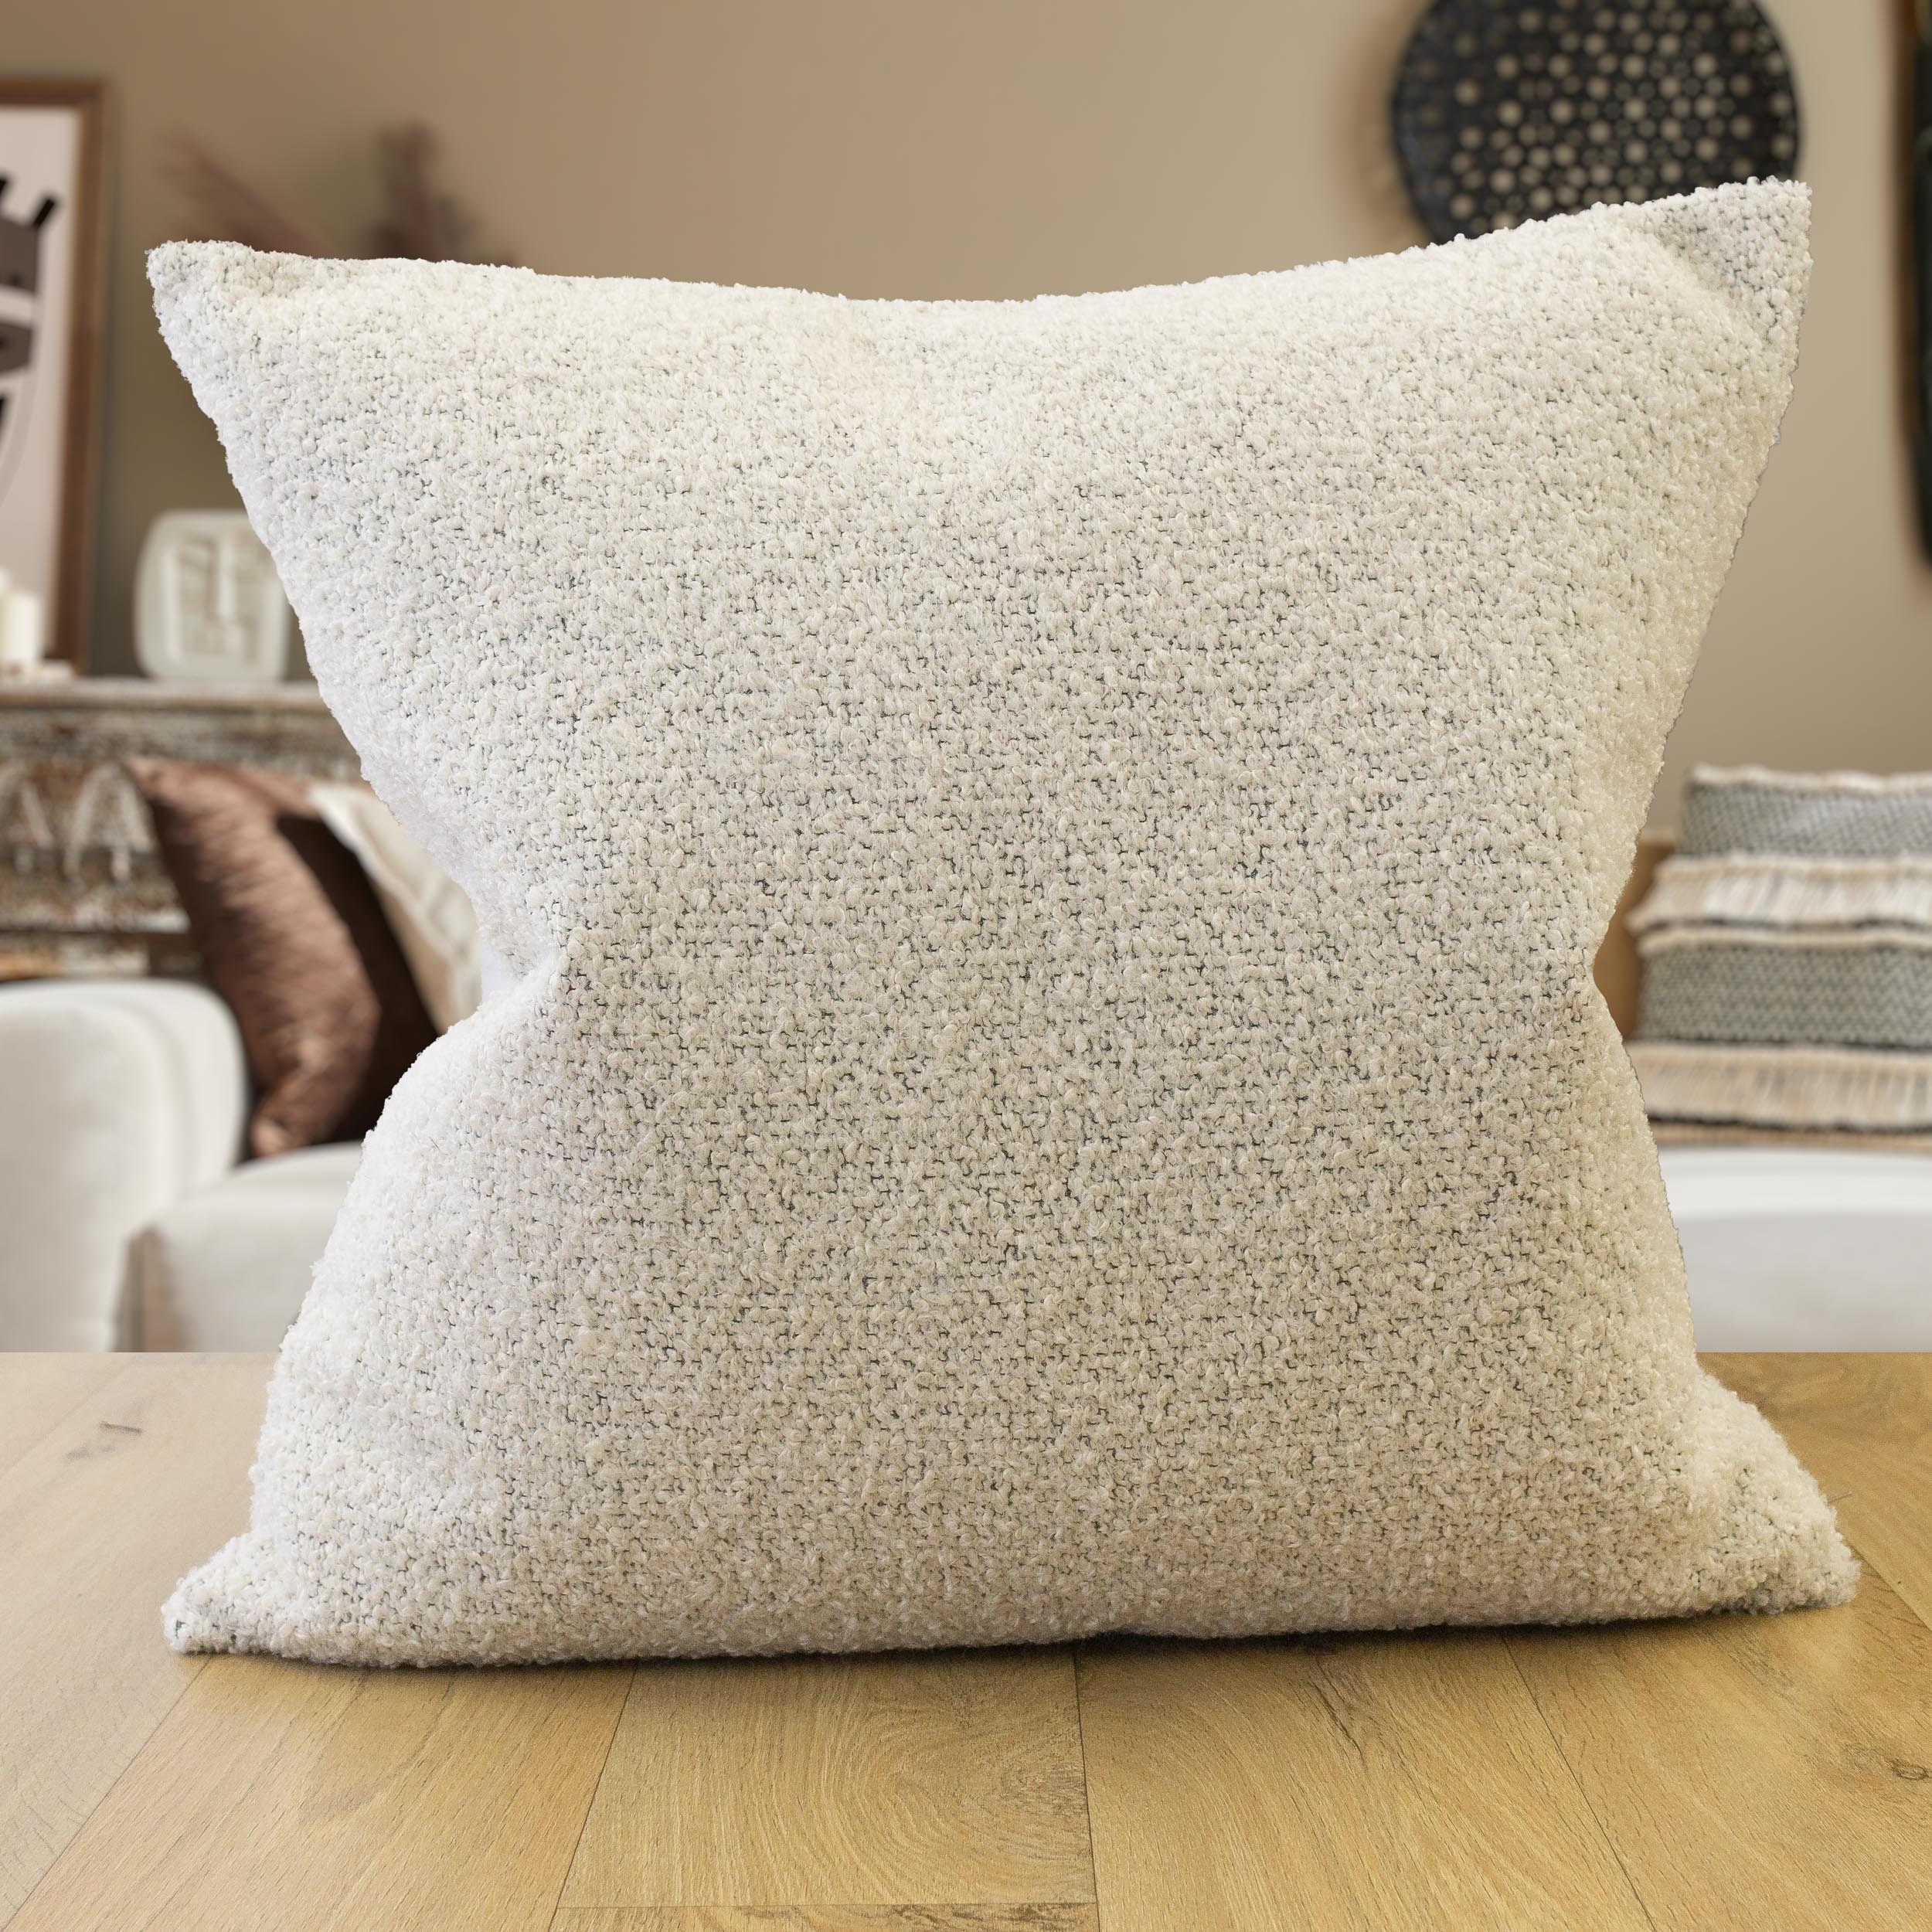 White Textured Puffy Boucle Pillow Cover, Unique Cozy Luxury Boucle Cushion,  Extra Soft Boucle Fabric, Teddy Lumbar Pillow, Living Room,sofa 